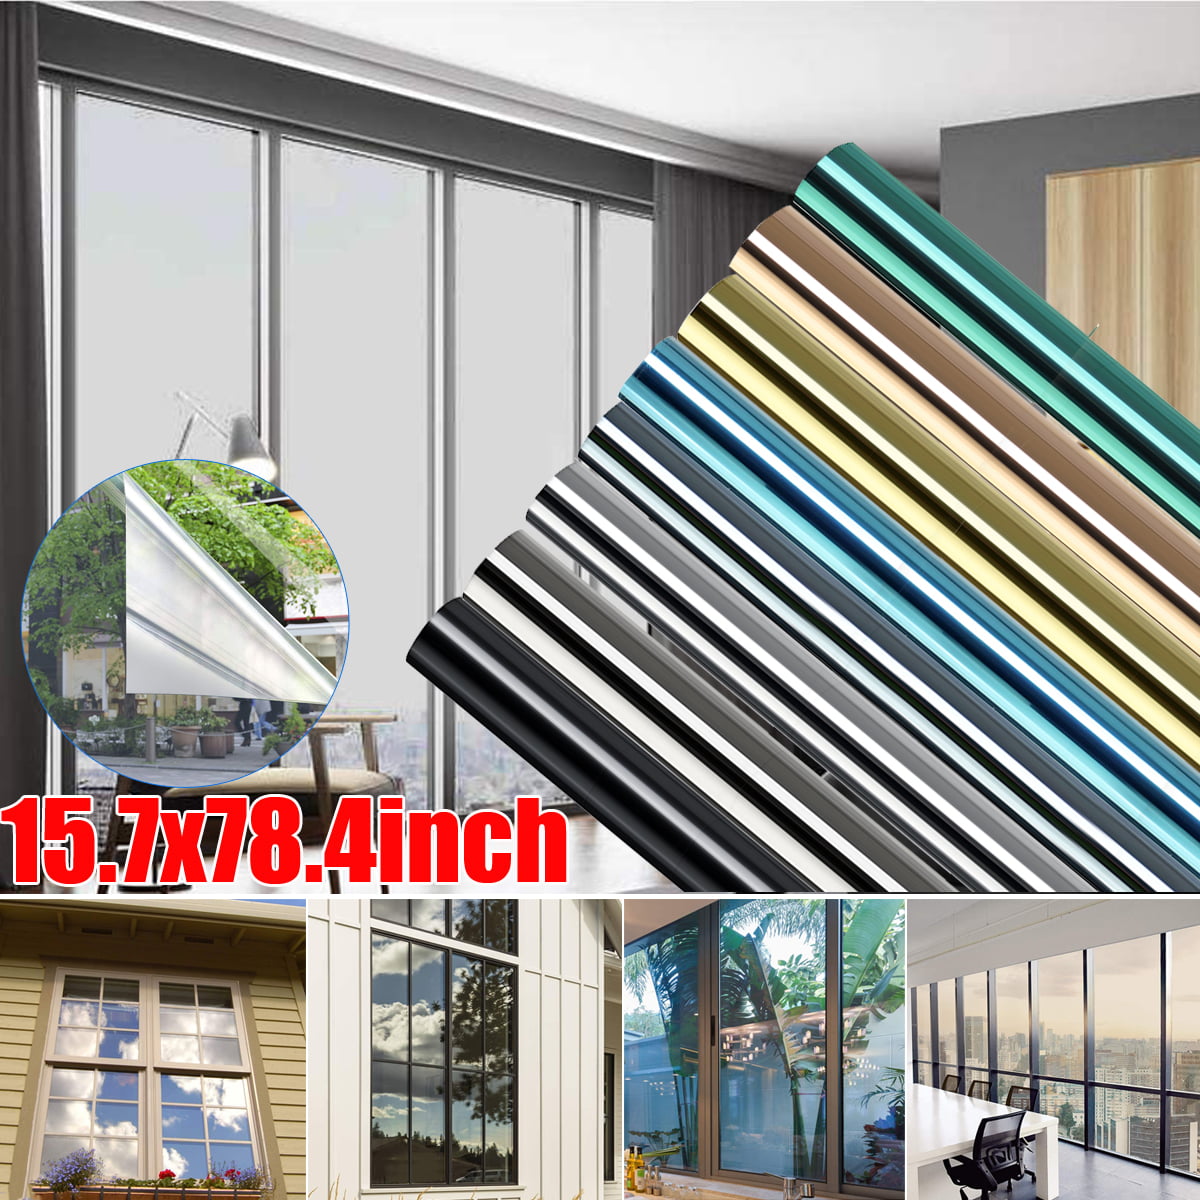 3FT x 24FT One Way Mirror Privacy Reflection Window Tint Film Energy Saver 15% 